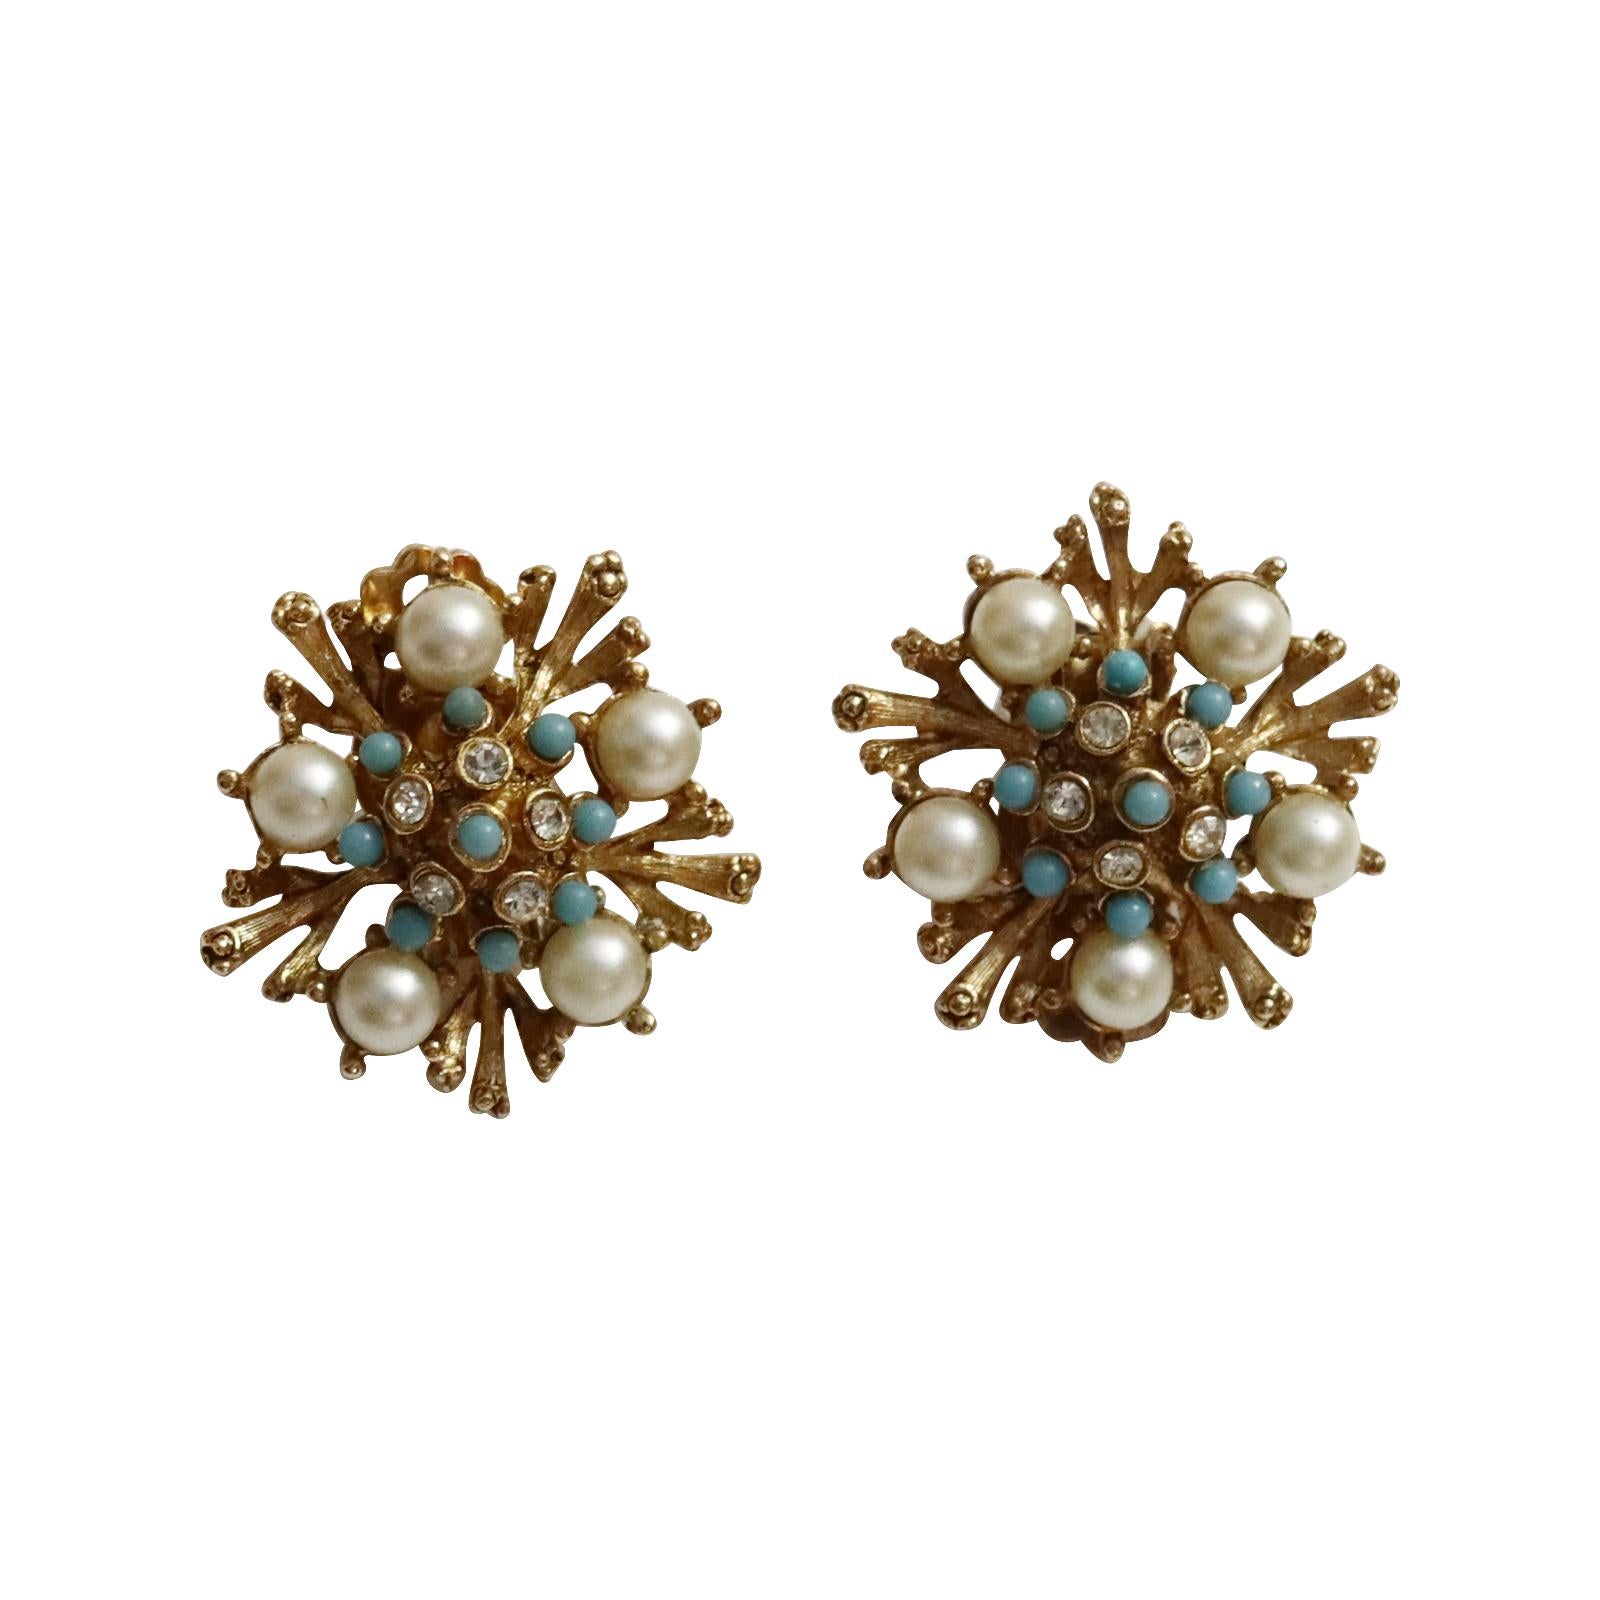 Modern Vintage Gold  Tone Diamante and Faux Turquoise Earrings Circa 1960s For Sale